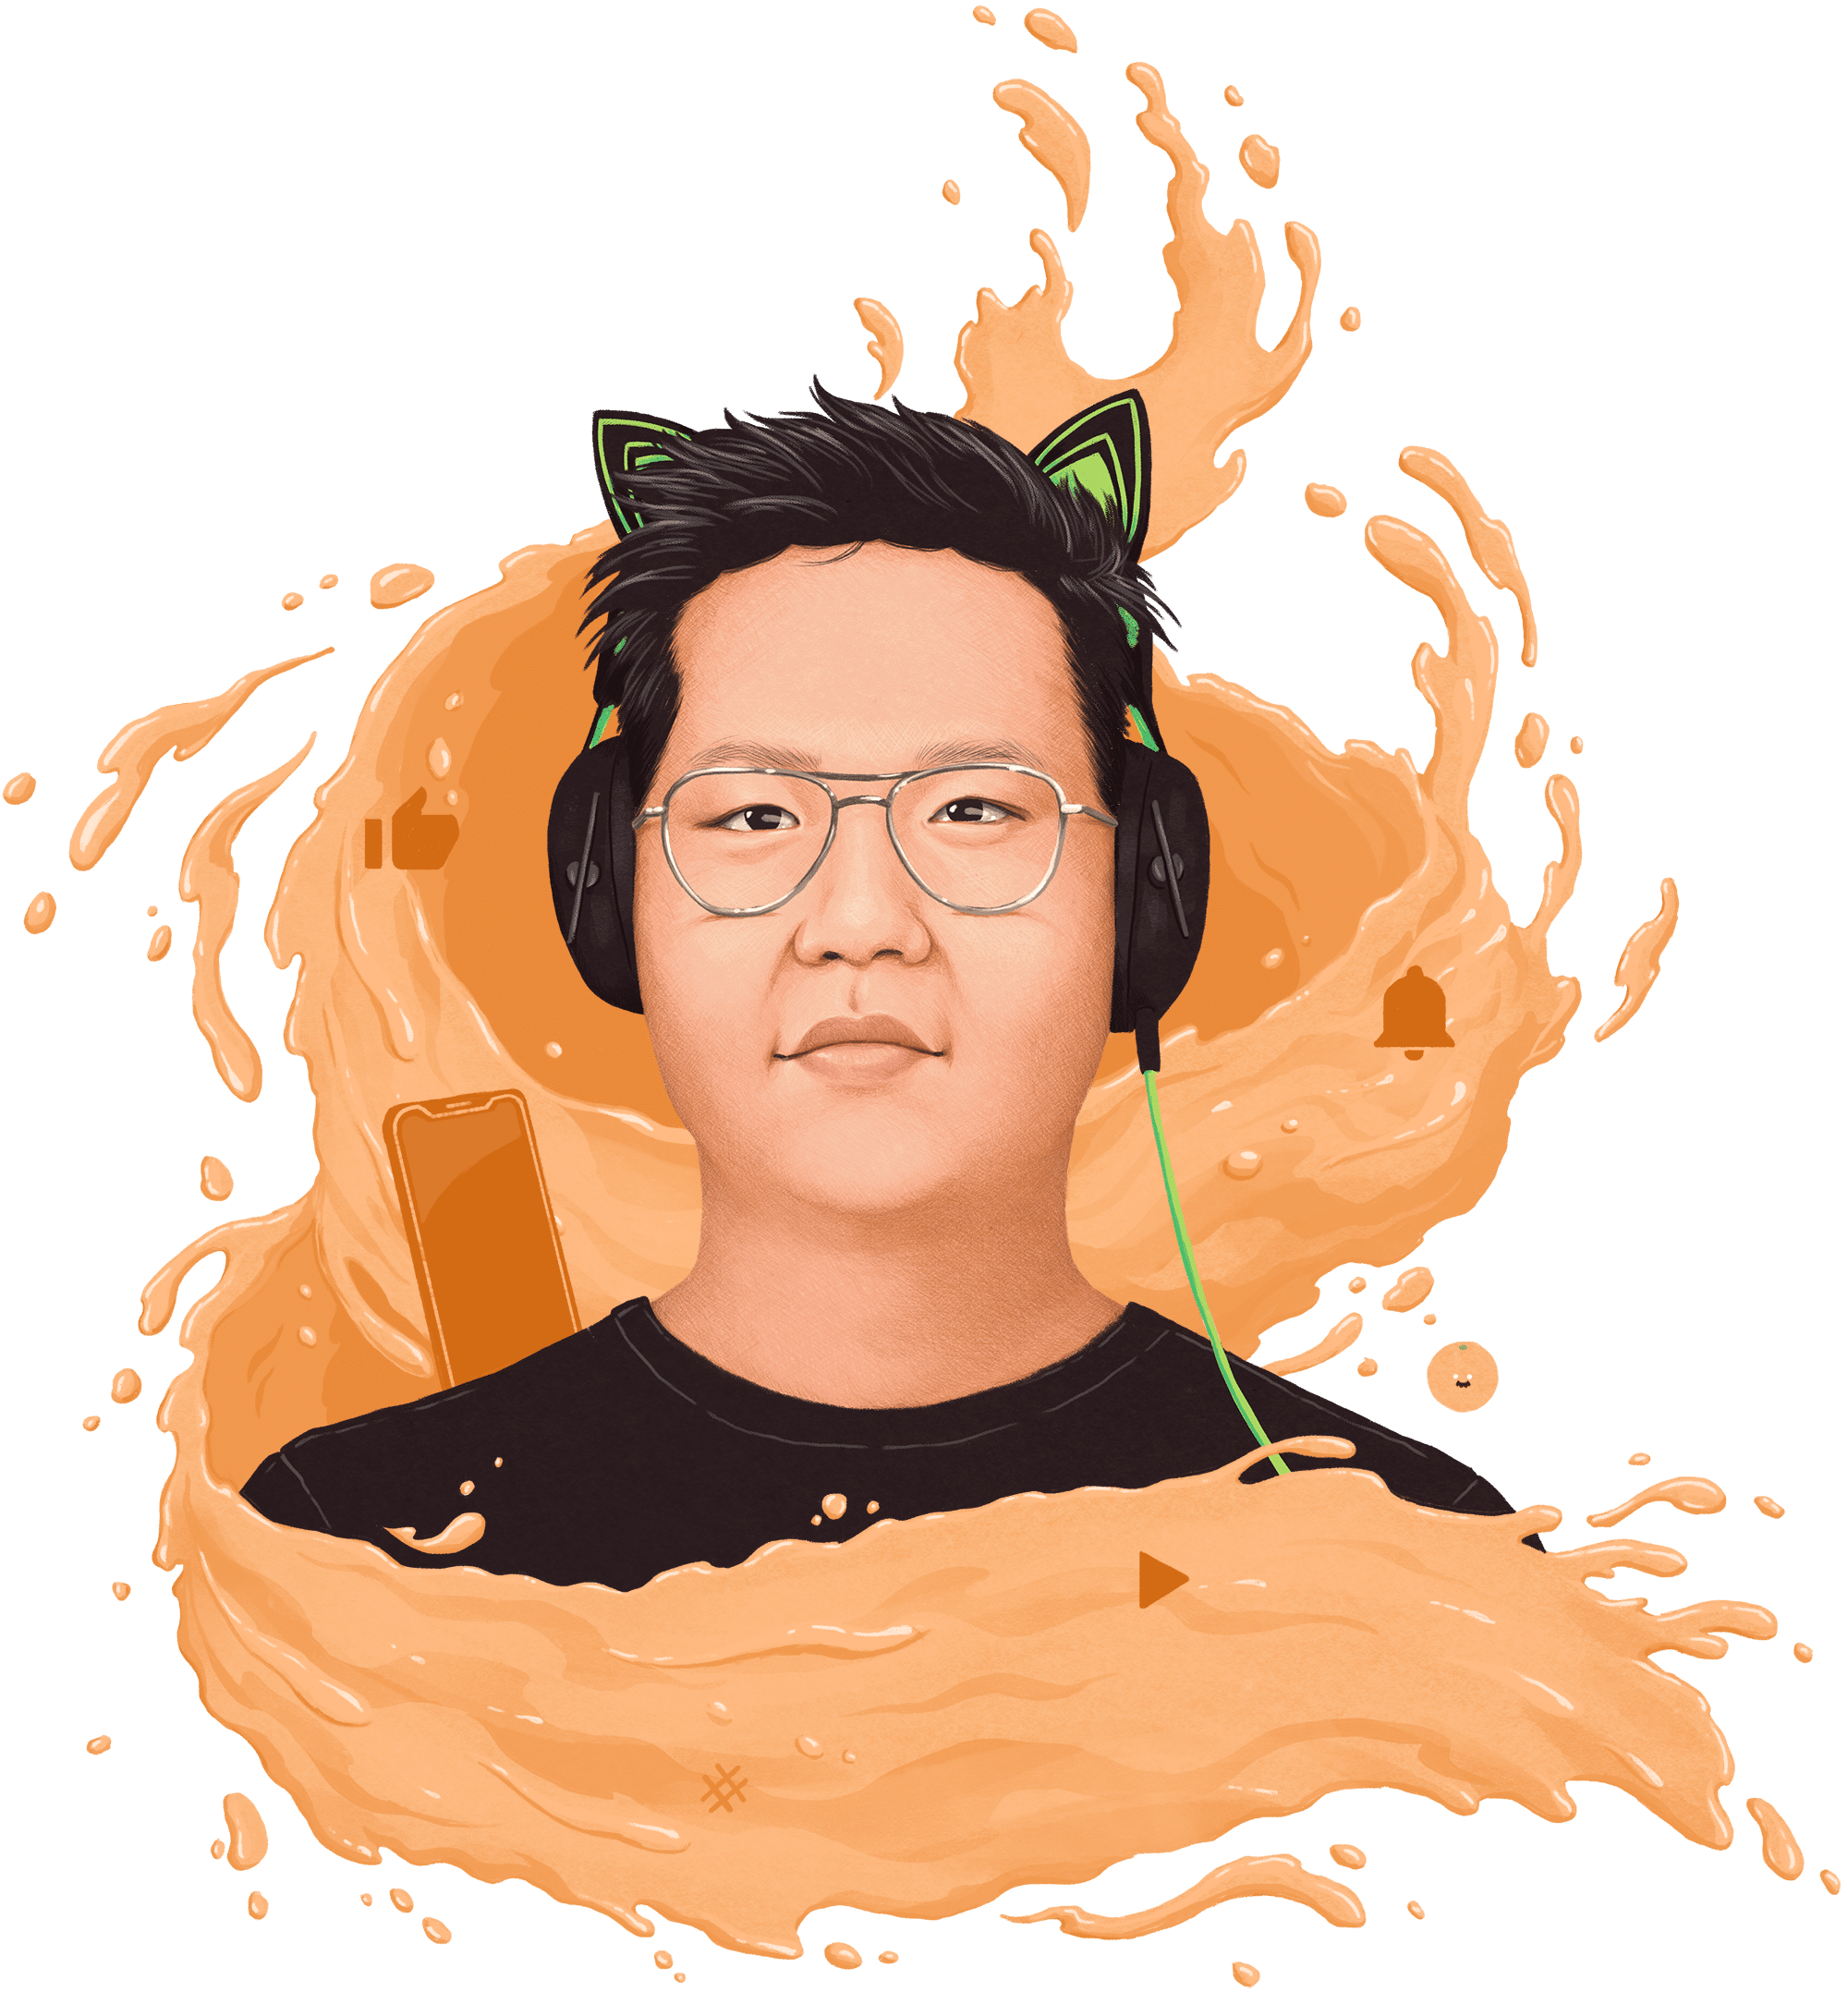 Illustration of YouTuber Jimmy Chau wearing his iconic cat-ear headset and surrounded by a swirl of orange juice.